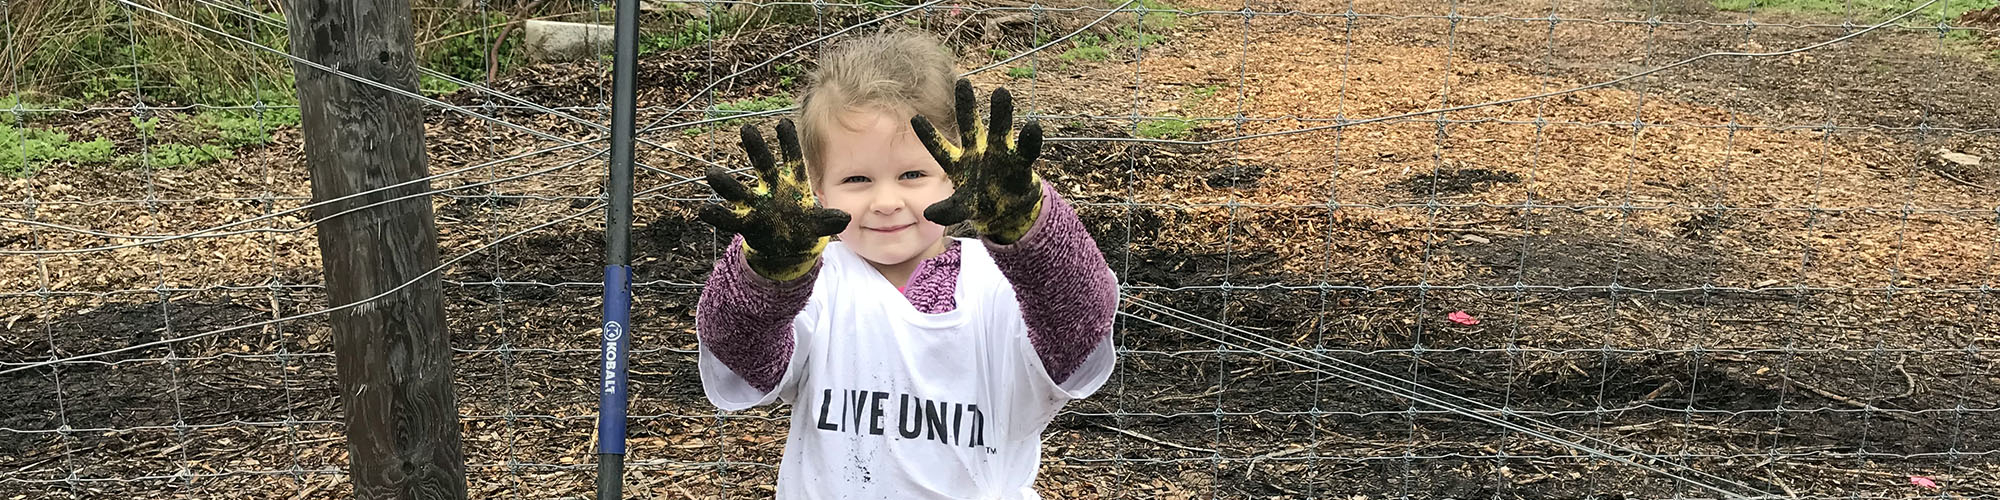 A young girl showing her dirty gloves to the camera while she was gardening